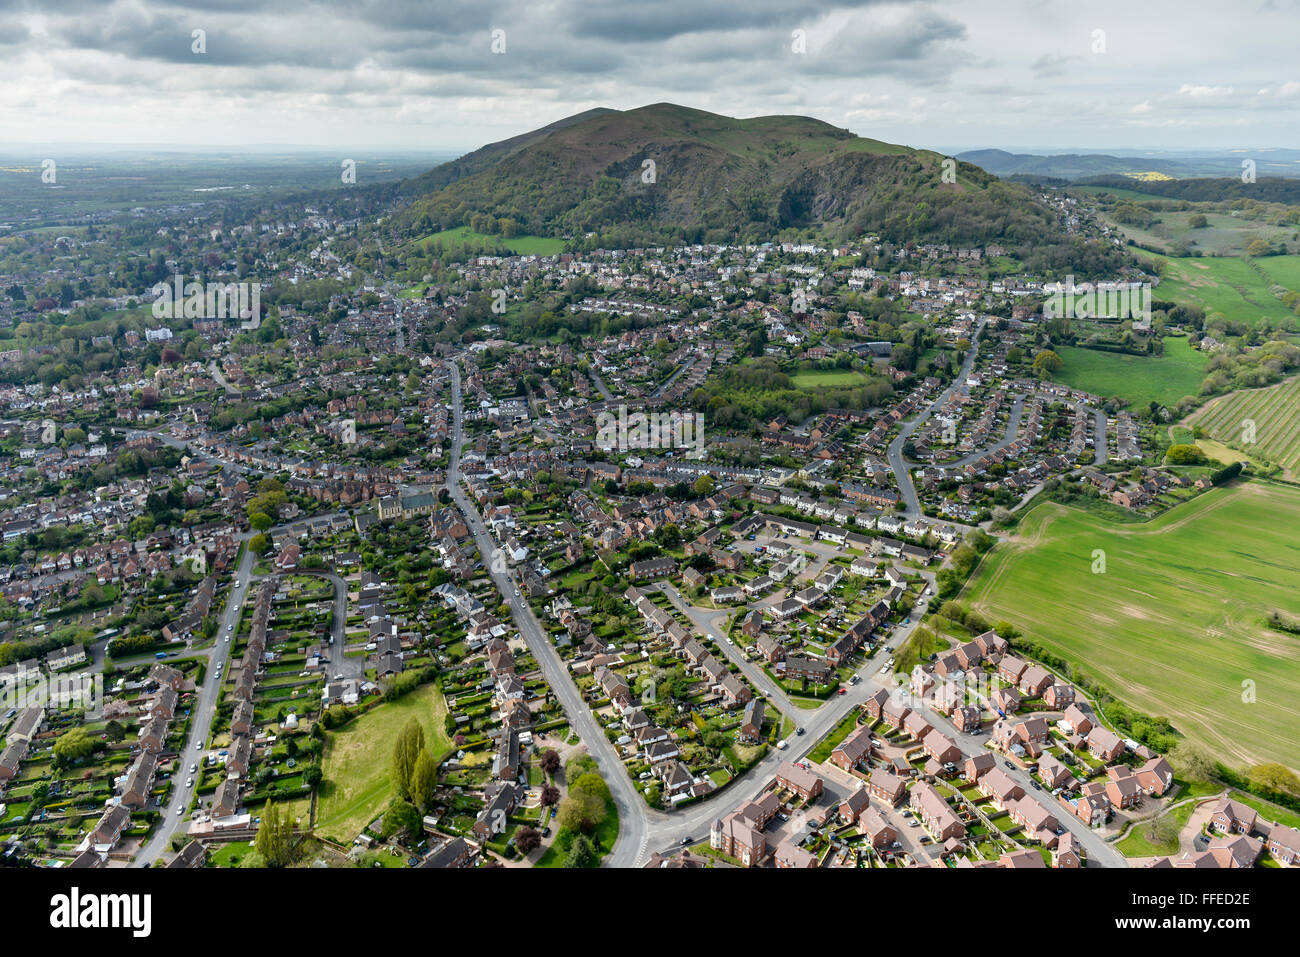 An aerial view of Great Malvern with the Malvern Hills visible under a looming grey sky Stock Photo